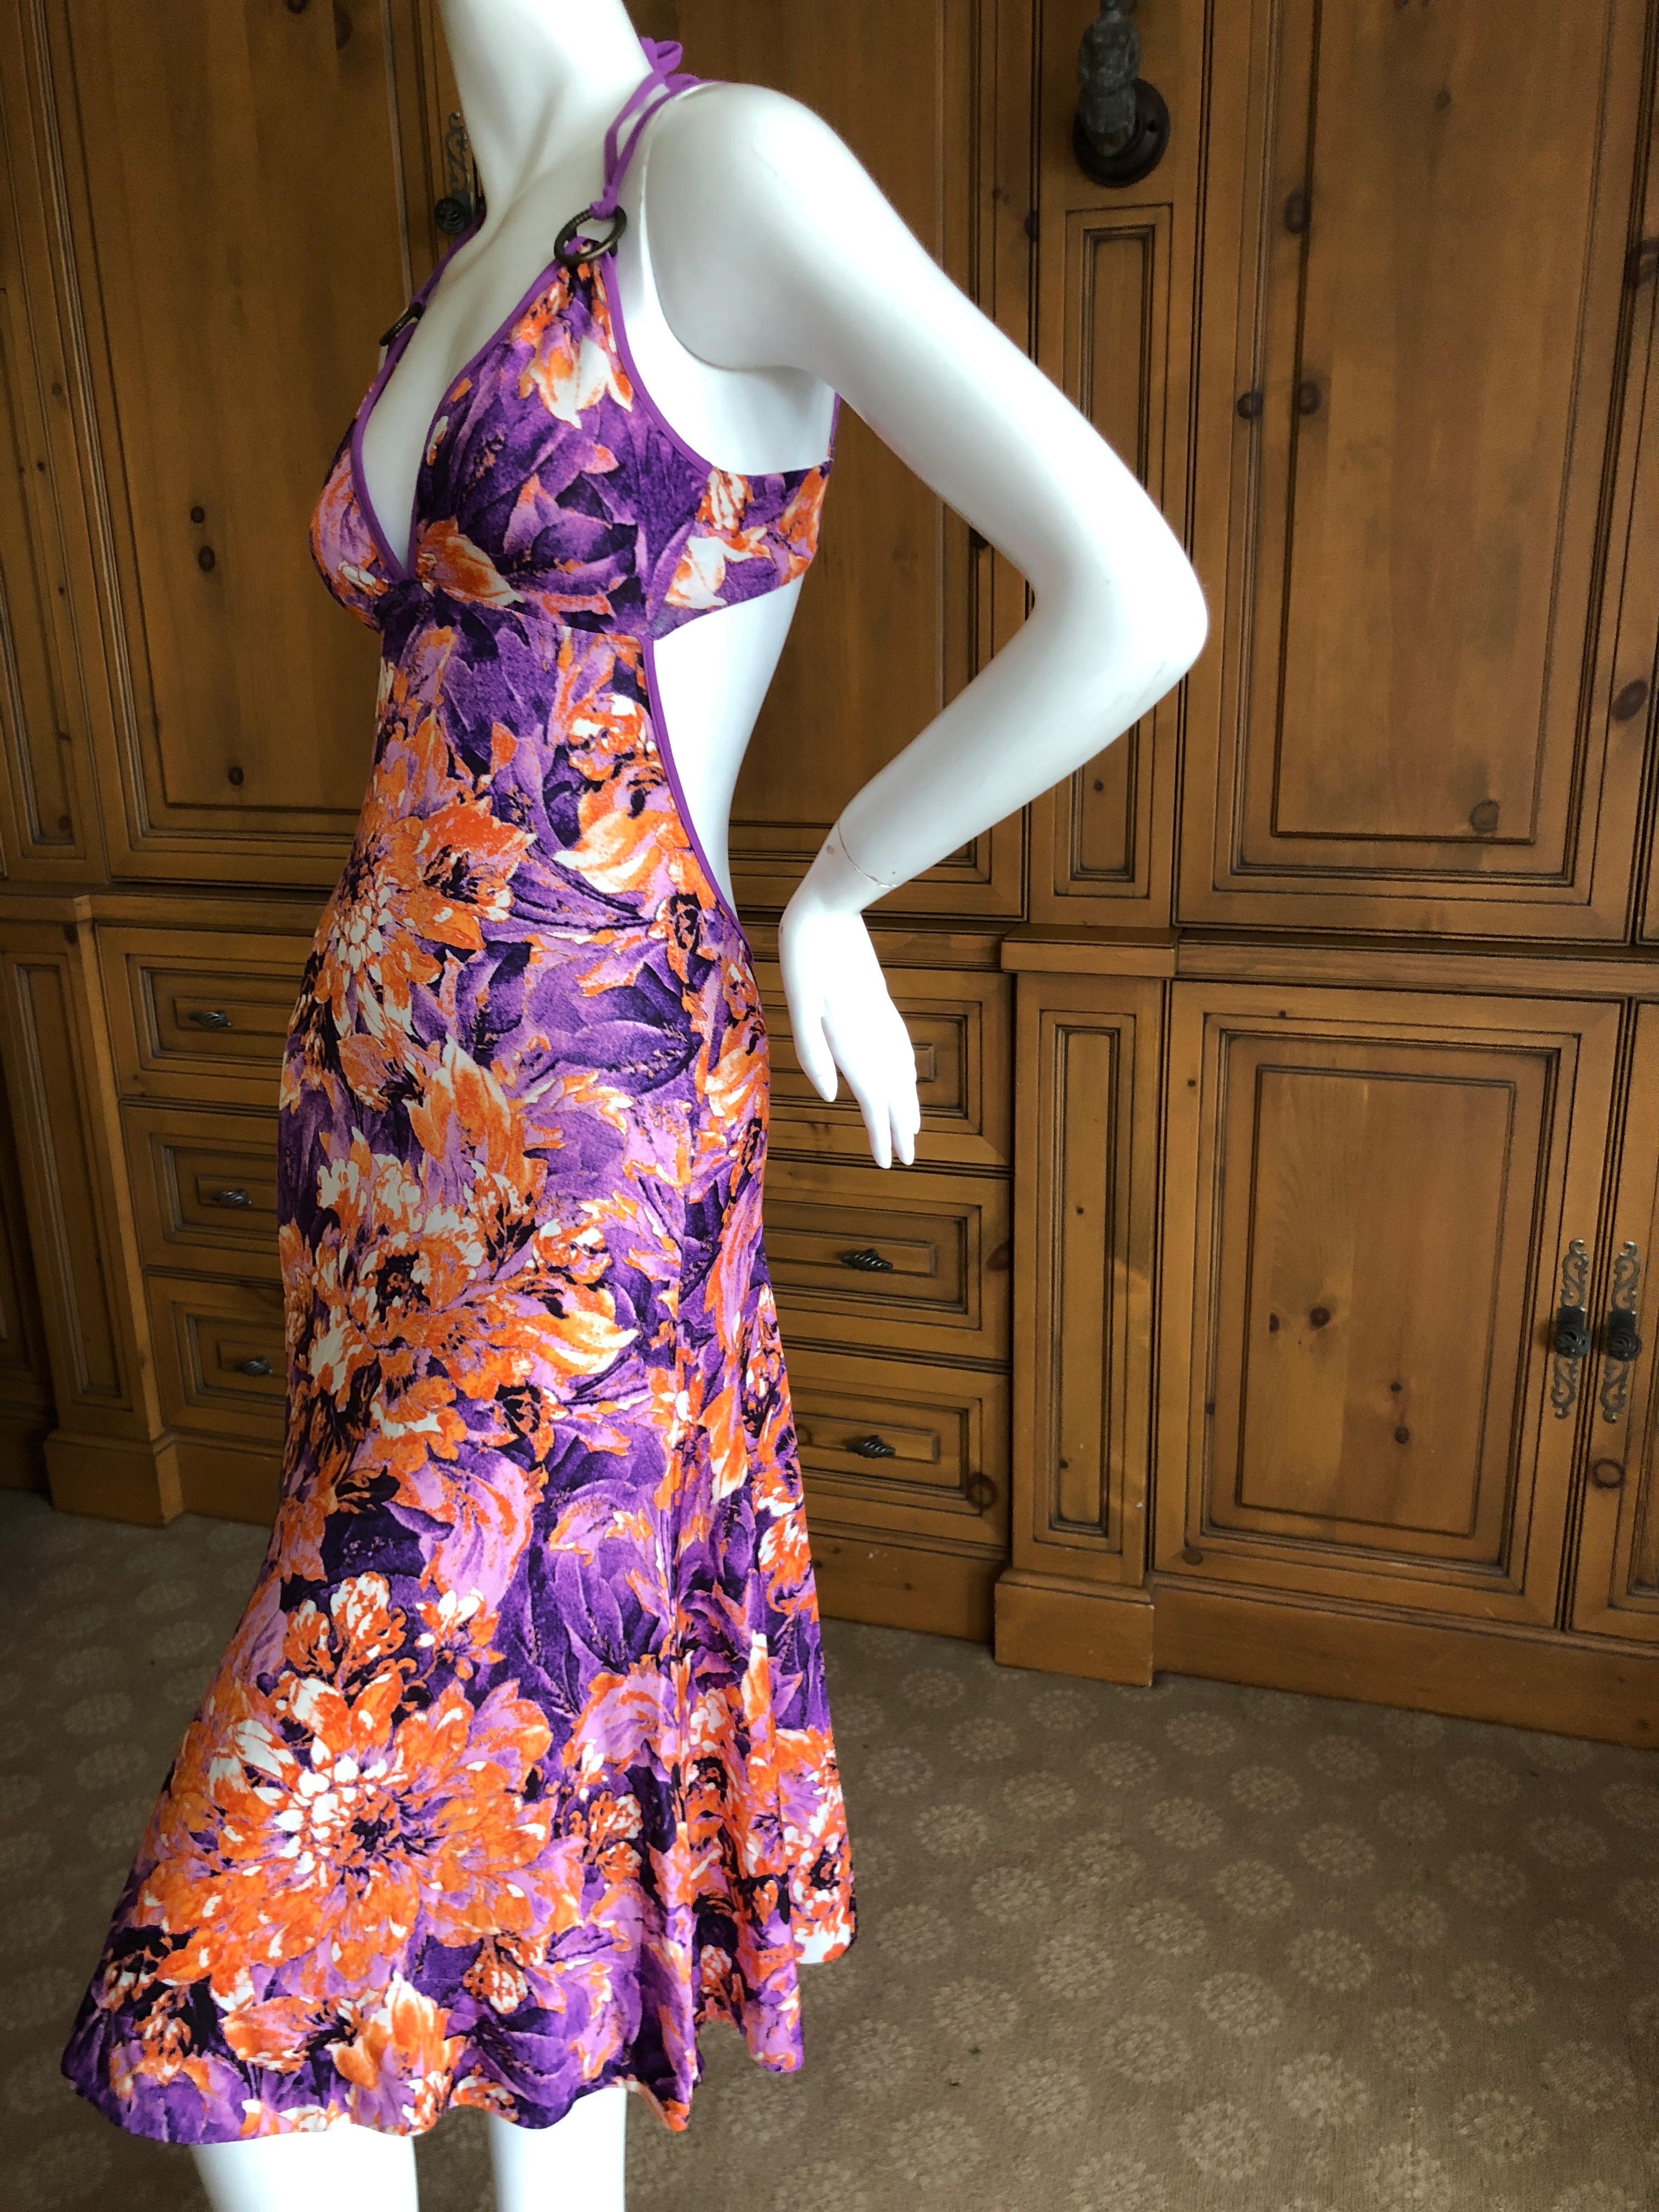 Roberto Cavalli Just Cavalli Vintage Floral Cross Back Dress
No size tag, size small
Bust  34